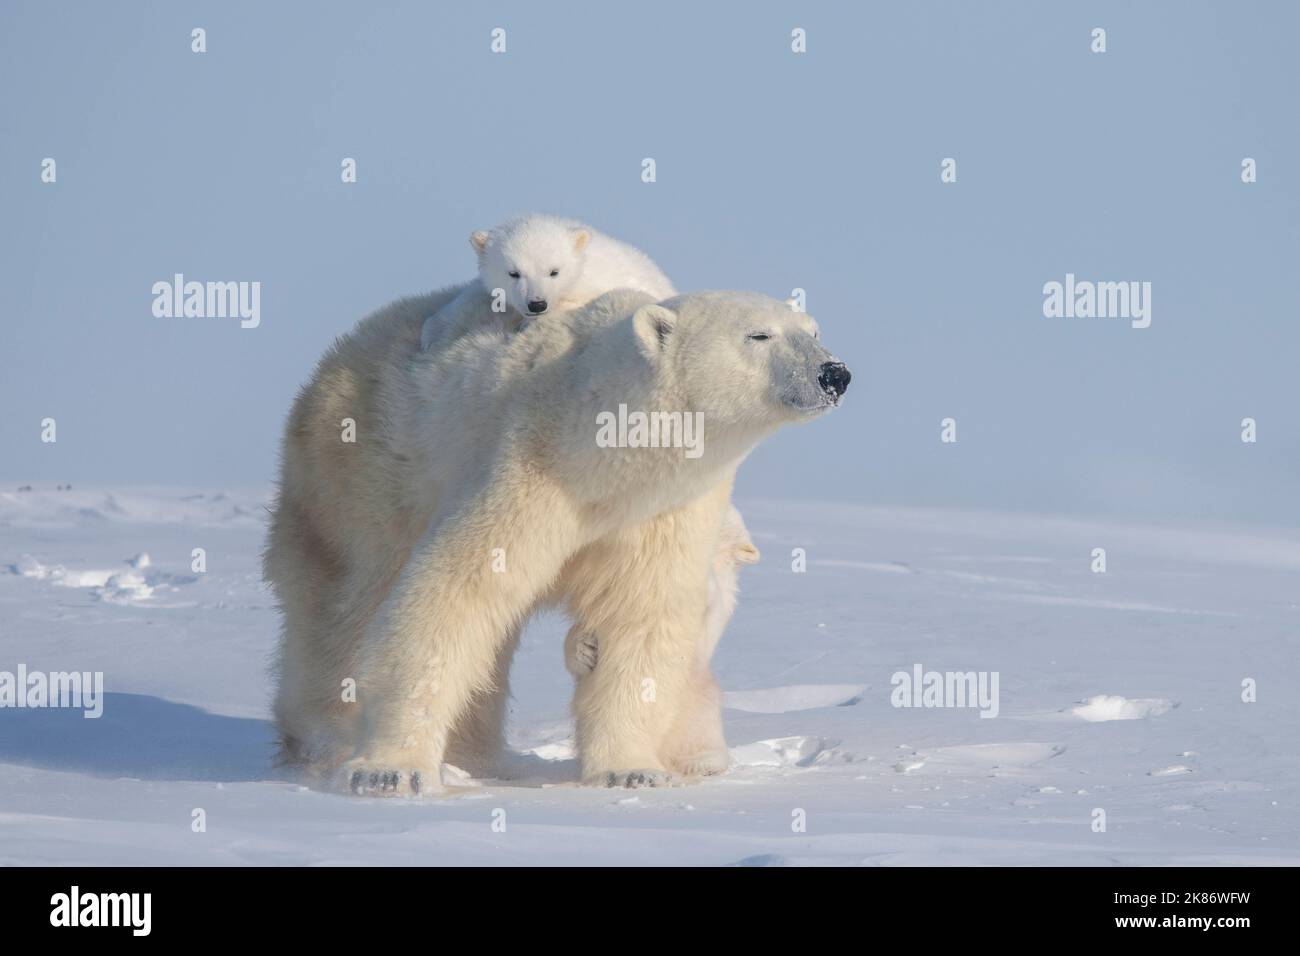 The cub hides on mums back. Wapusk National Park, Canada: DURING their first journey outside these three-month-old polar bear cubs couldn?t resist hop Stock Photo